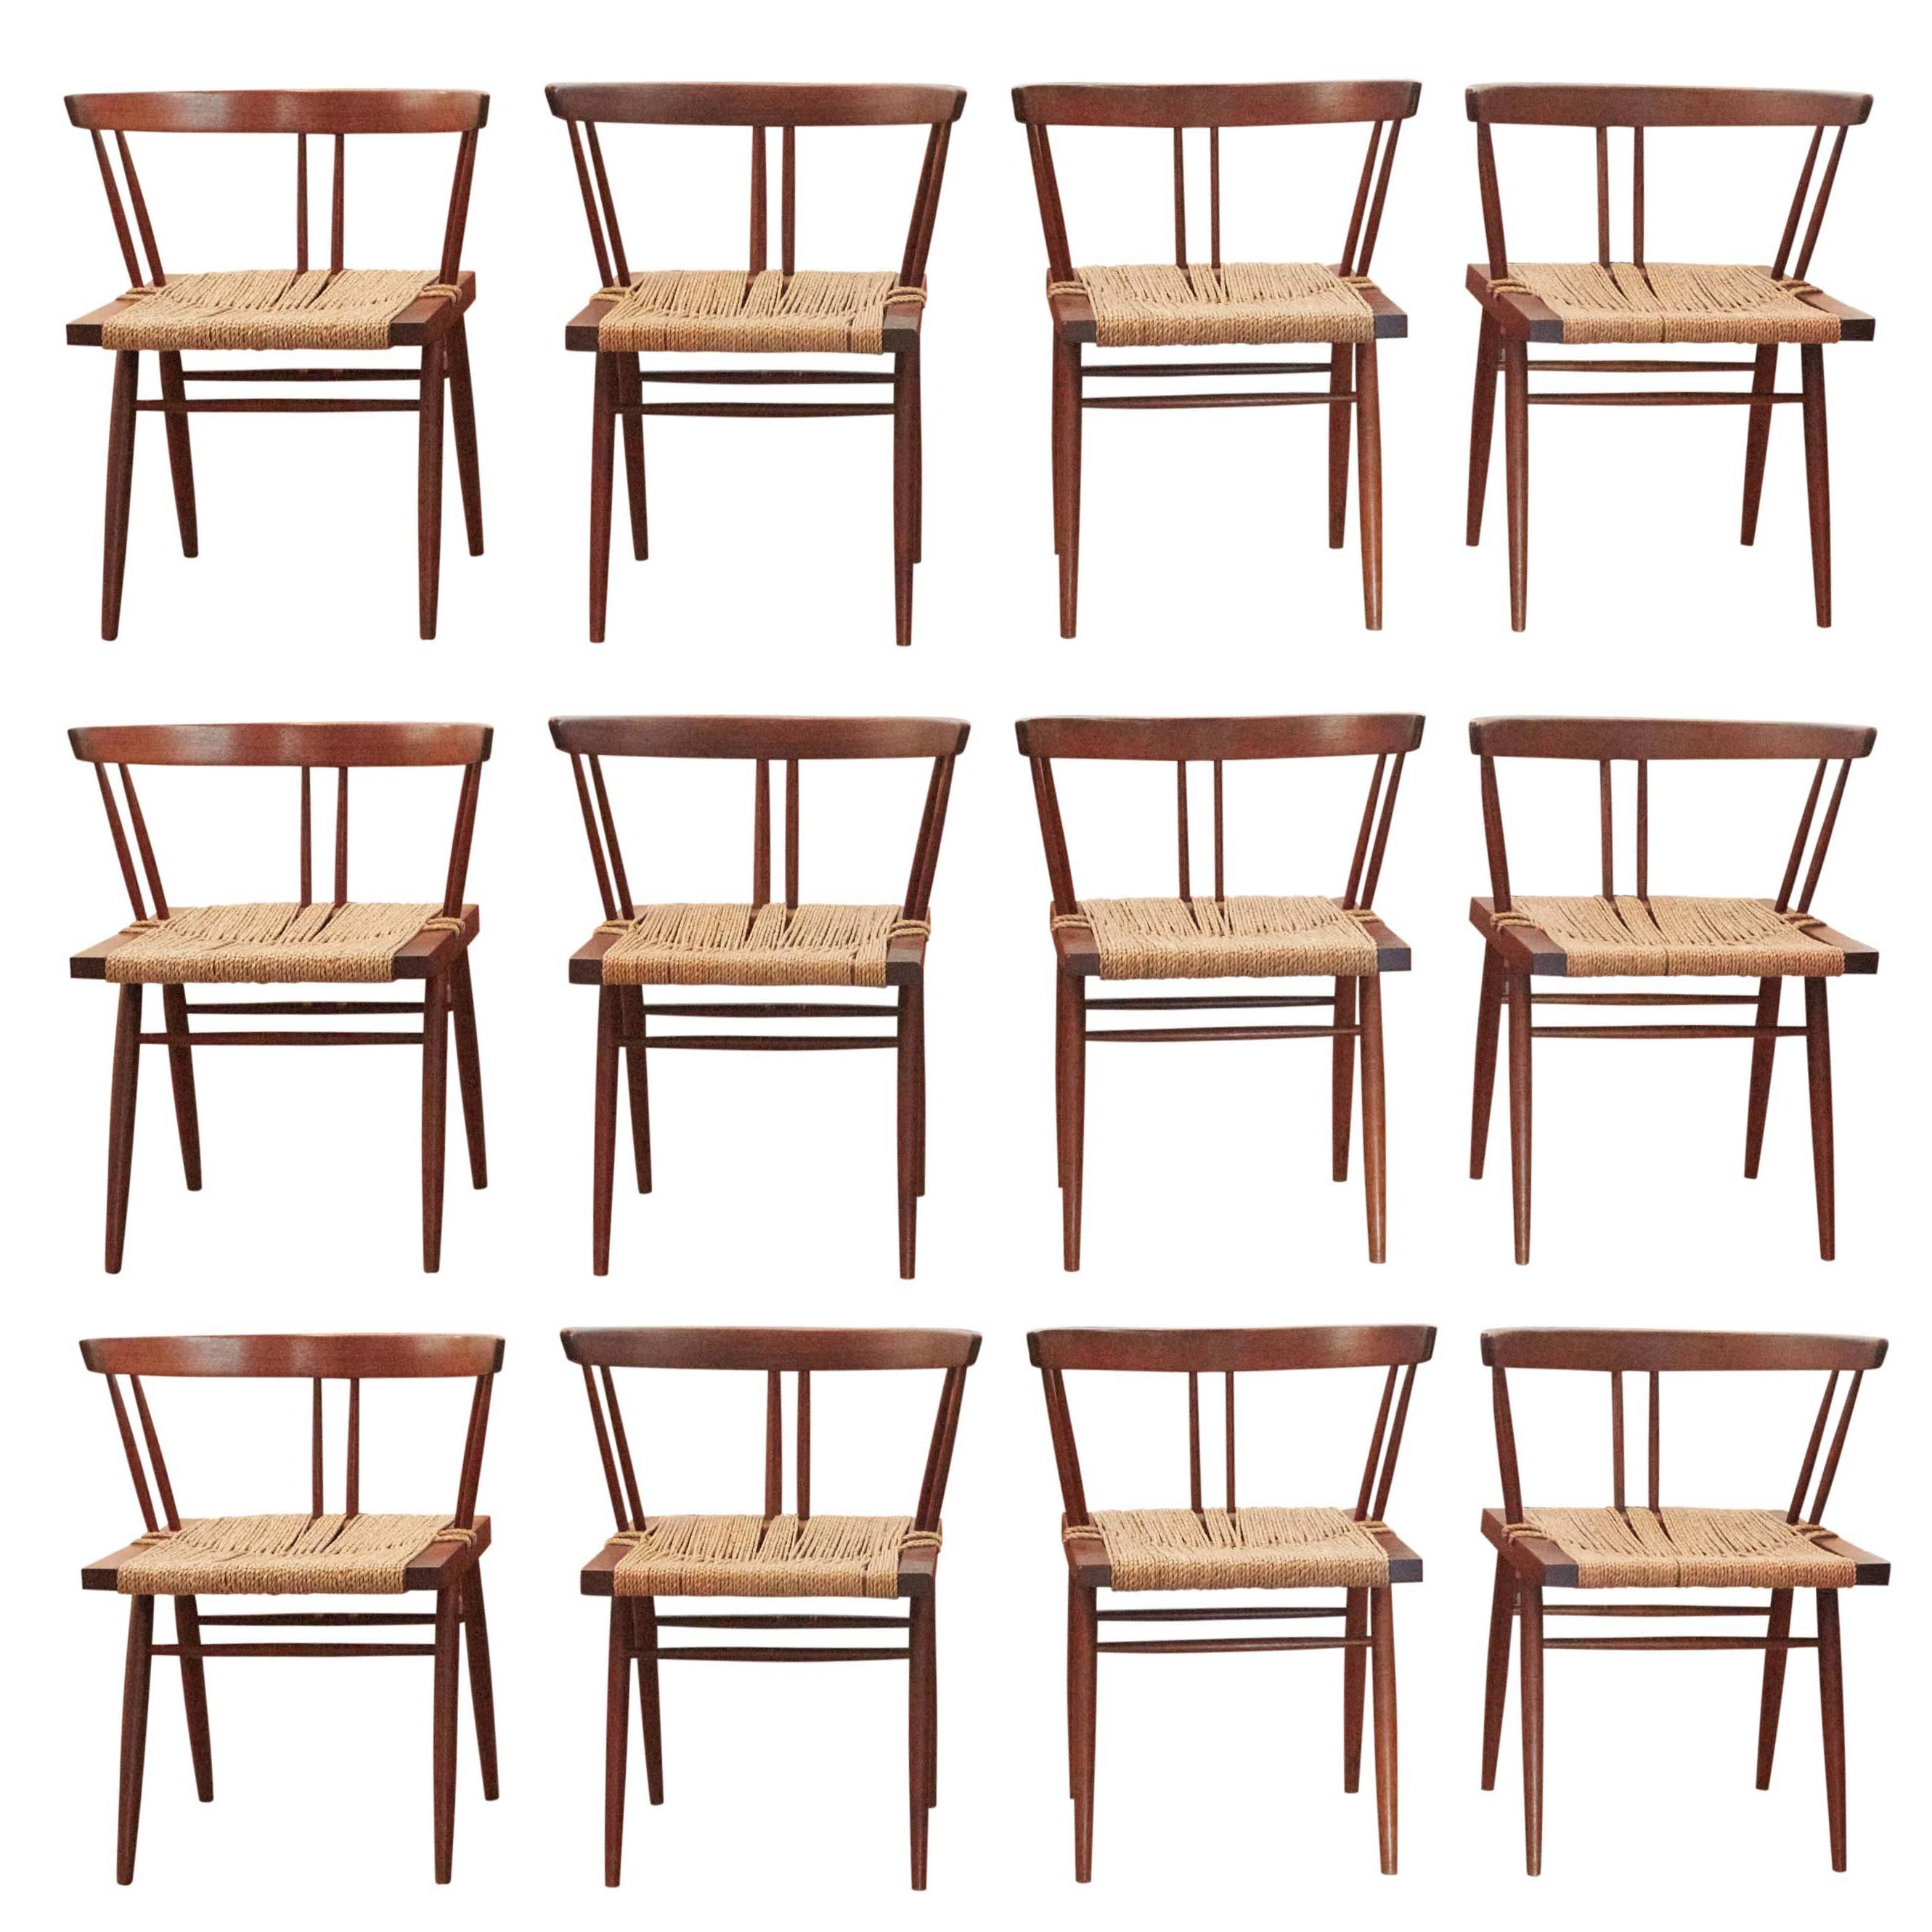 Set of 12 Grass Seat Chairs by George Nakashima, New Hope, Pennsylvania